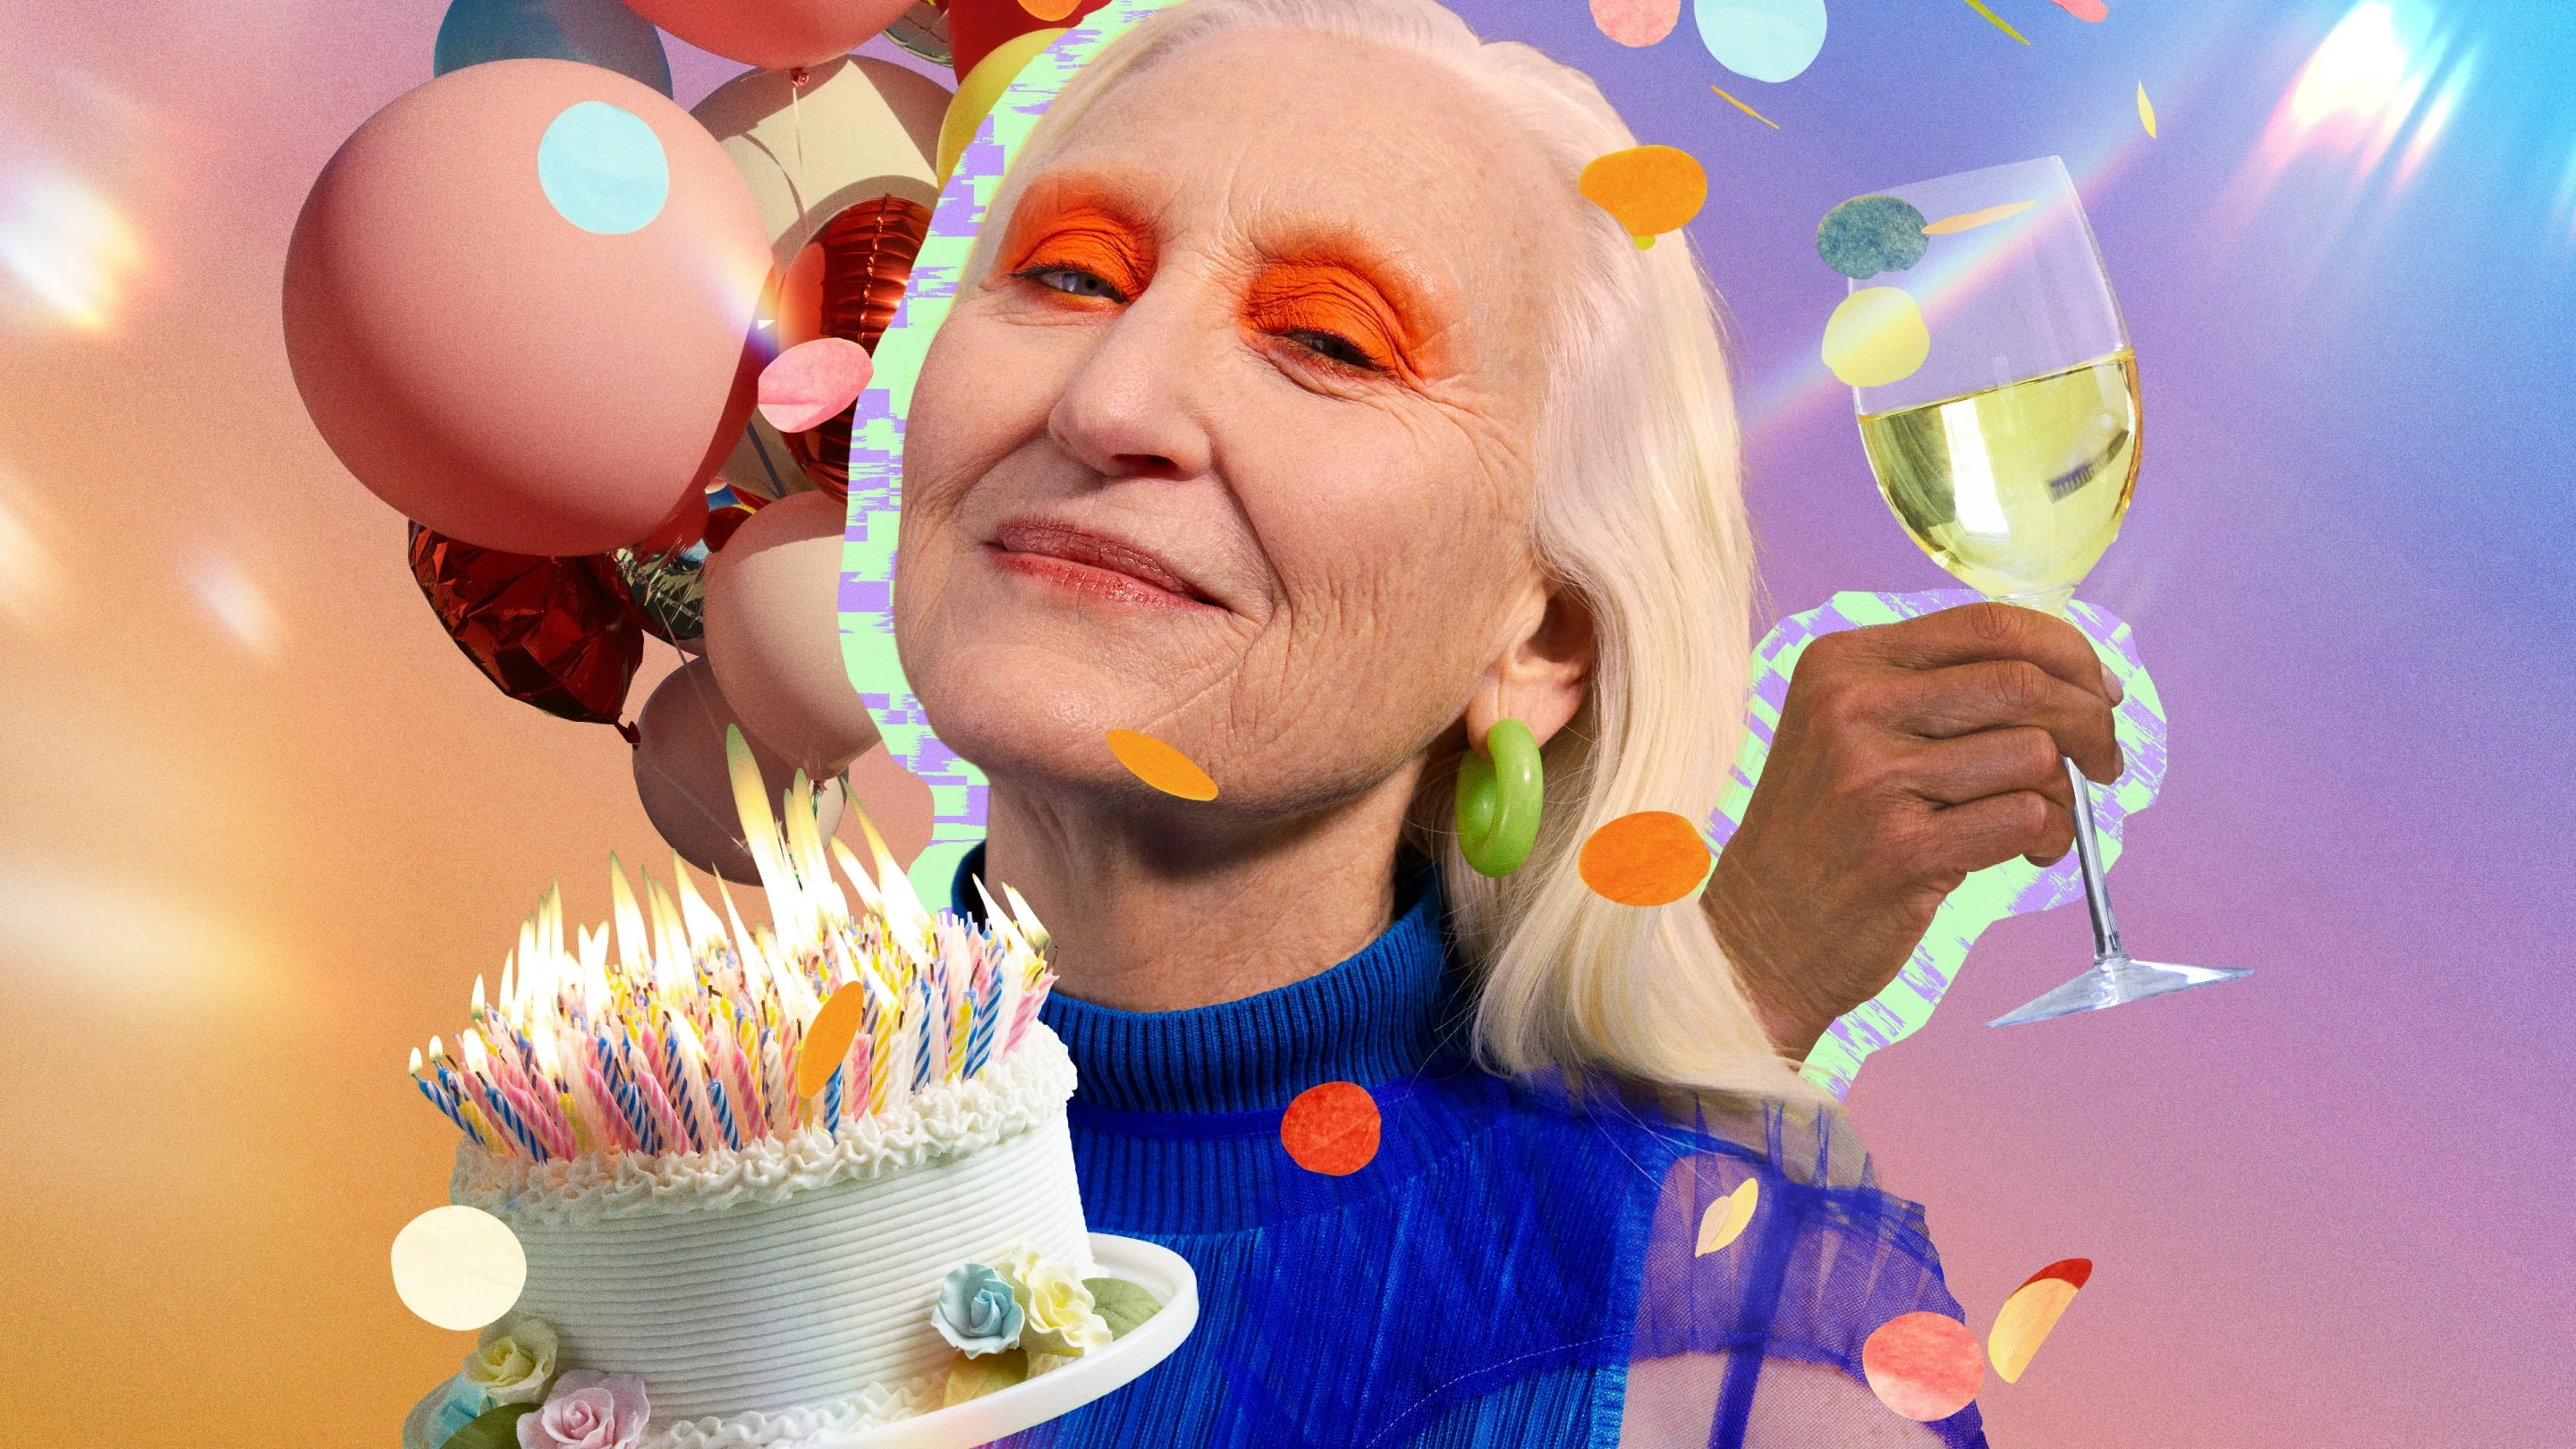 Collage featuring an older white woman with bright eye make-up surrounded by balloons, a hand holding a wine glass and a birthday cake overflowing with candles.